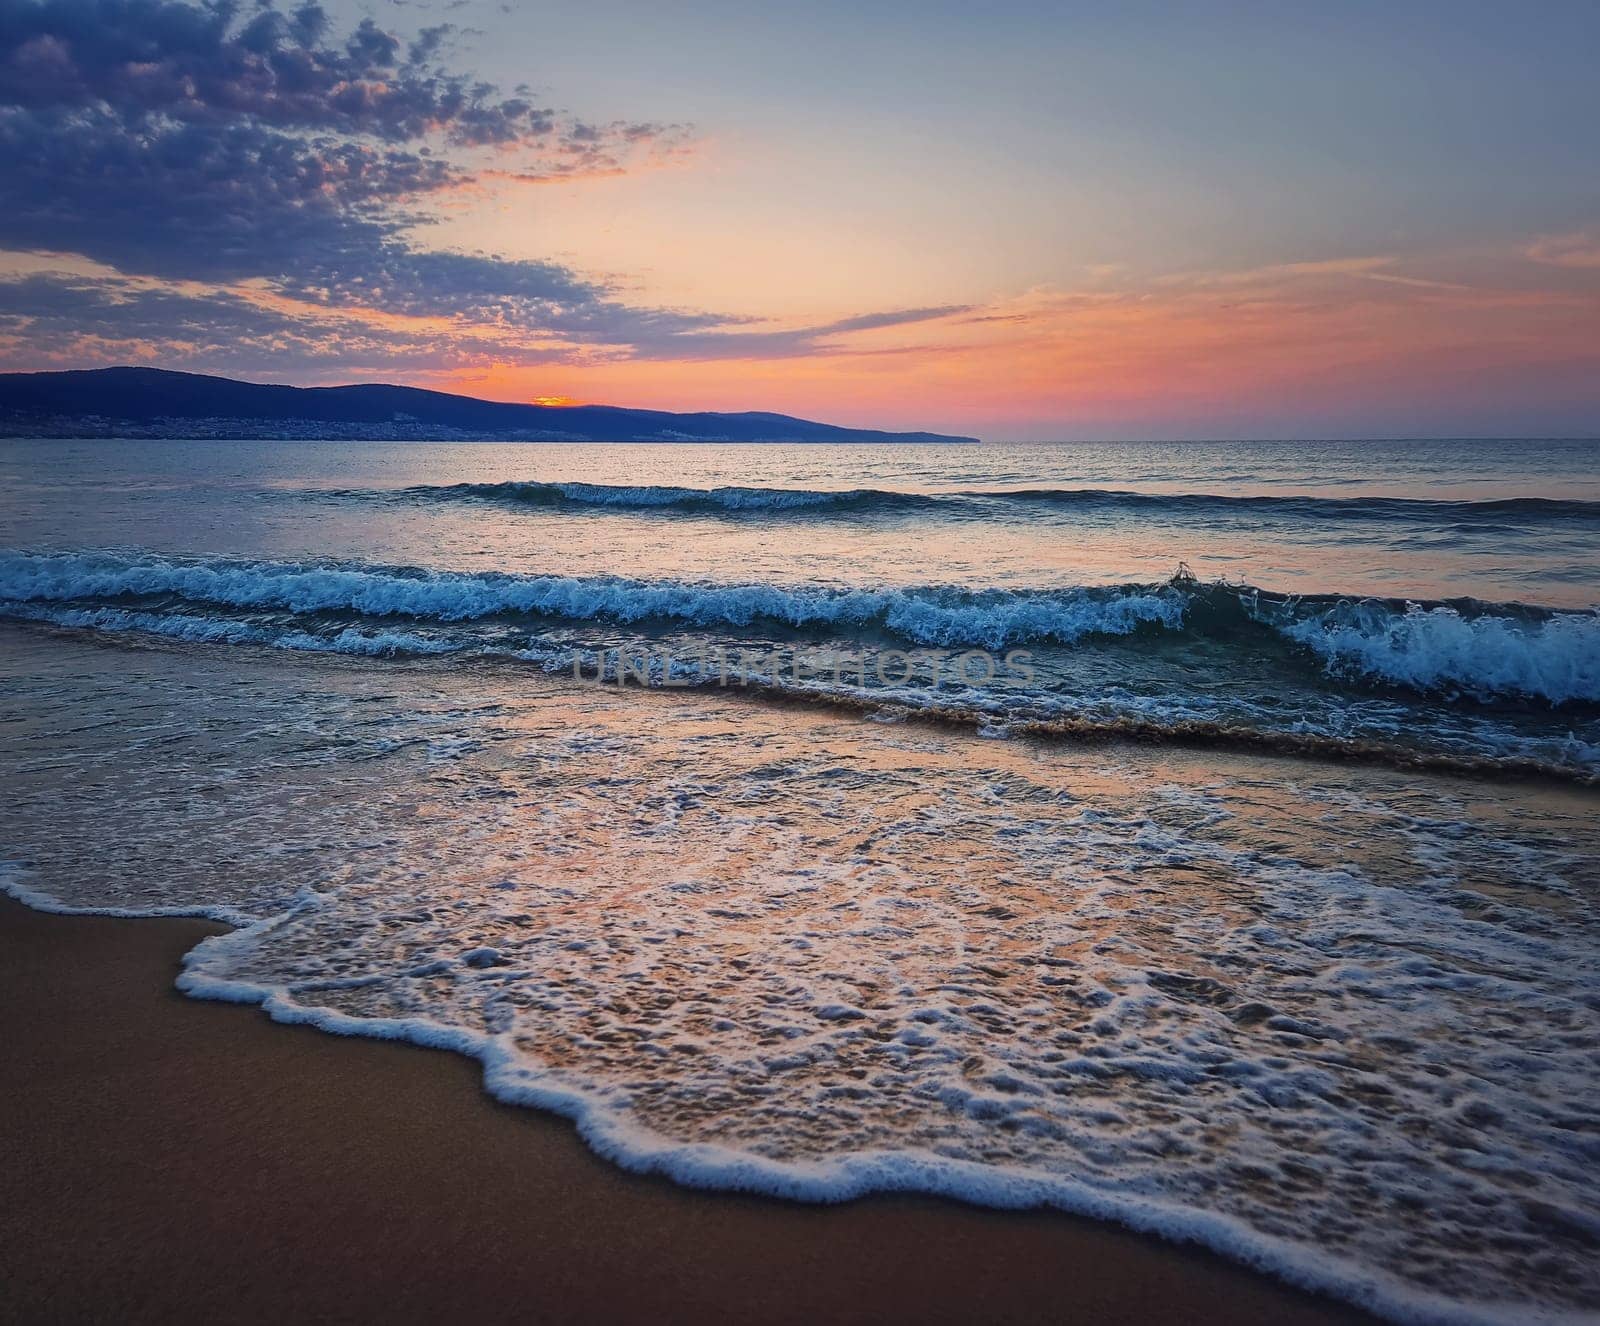 Dawn at the sea with foamy waves on the sand and colorful sky at the horizon. Sunny Beach coastline in Bulgaria. Summer and travel background by psychoshadow